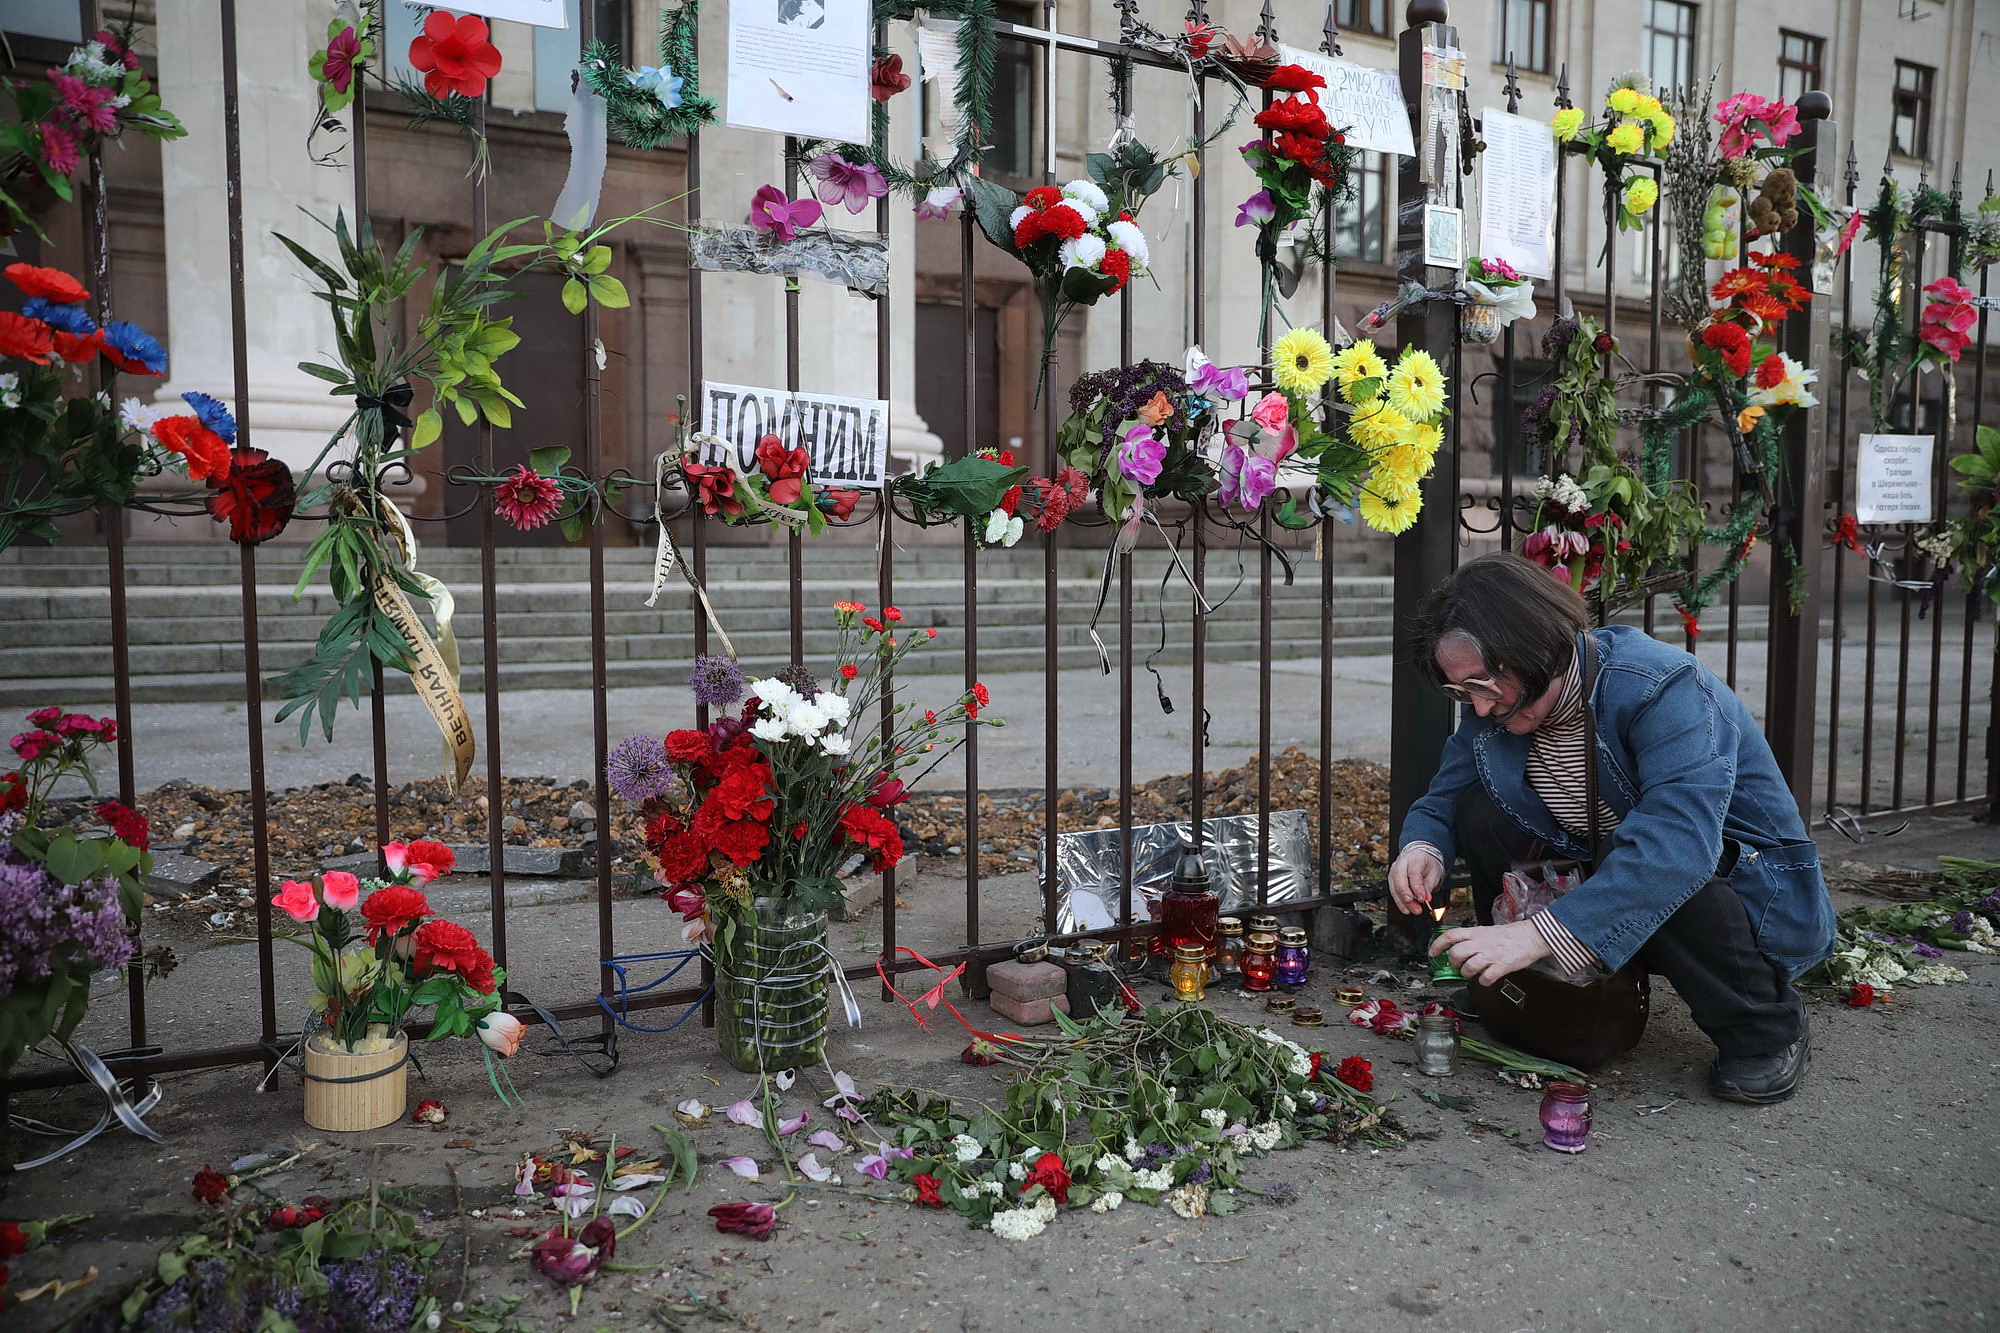 Pro-Russian activist Vera Butuk lits candles by the gate surrounding the Trade Unions House in Odesa on May 12, 2019, in remembrance of 42 people, who died from the fire there on May 2, 2014. The 48 people were killed in Odesa on that day as a result of the fire and street fights between pro-Russian and pro-Ukrainian activists.